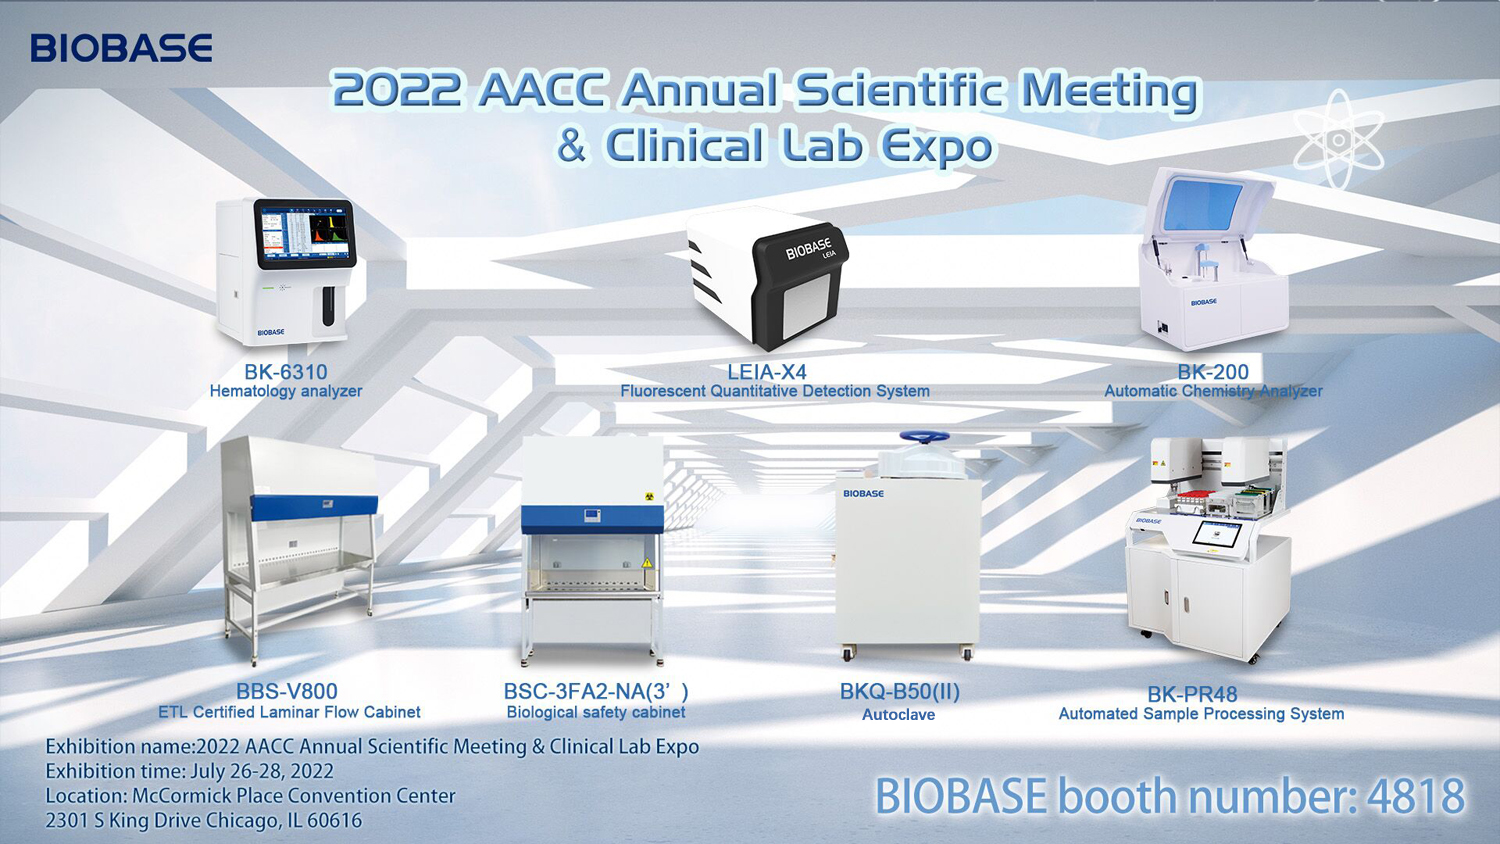 BIOBASE invites you to the 2022 AACC